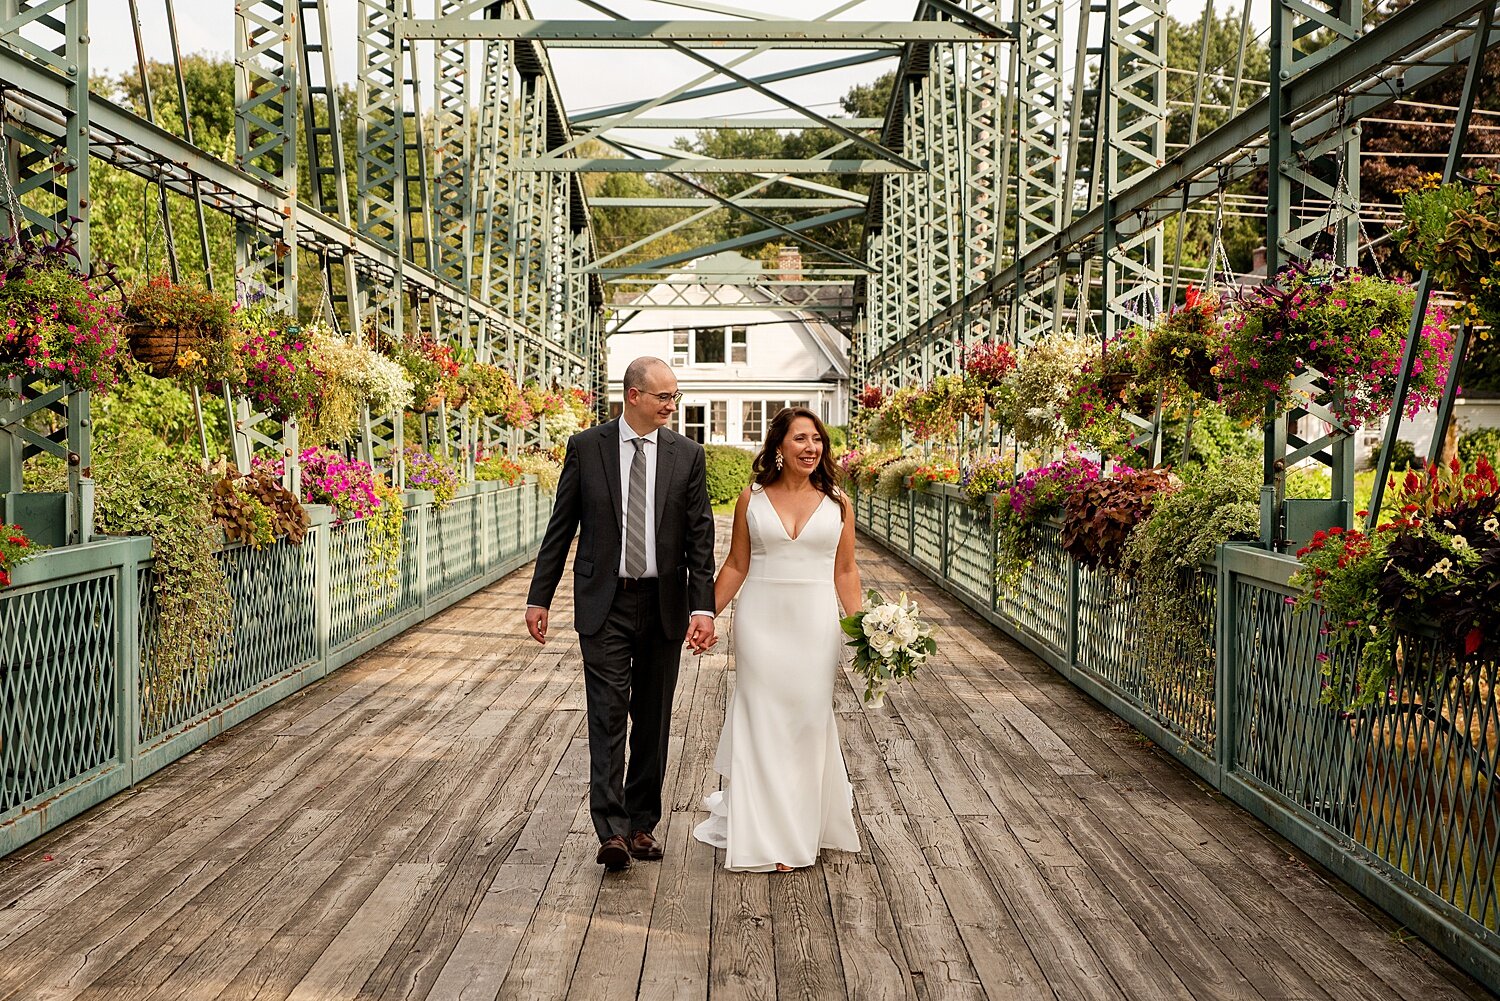 Making a pit stop at the #drakehillflowerbridge in #simsbury on our way to an intimate wedding reception at #millwrightsrestaurant .
.
.
.
.
.
 #ctweddingphotographer  #connecticutweddingphotographer #connecticut #connecticutphotographer #connecticut